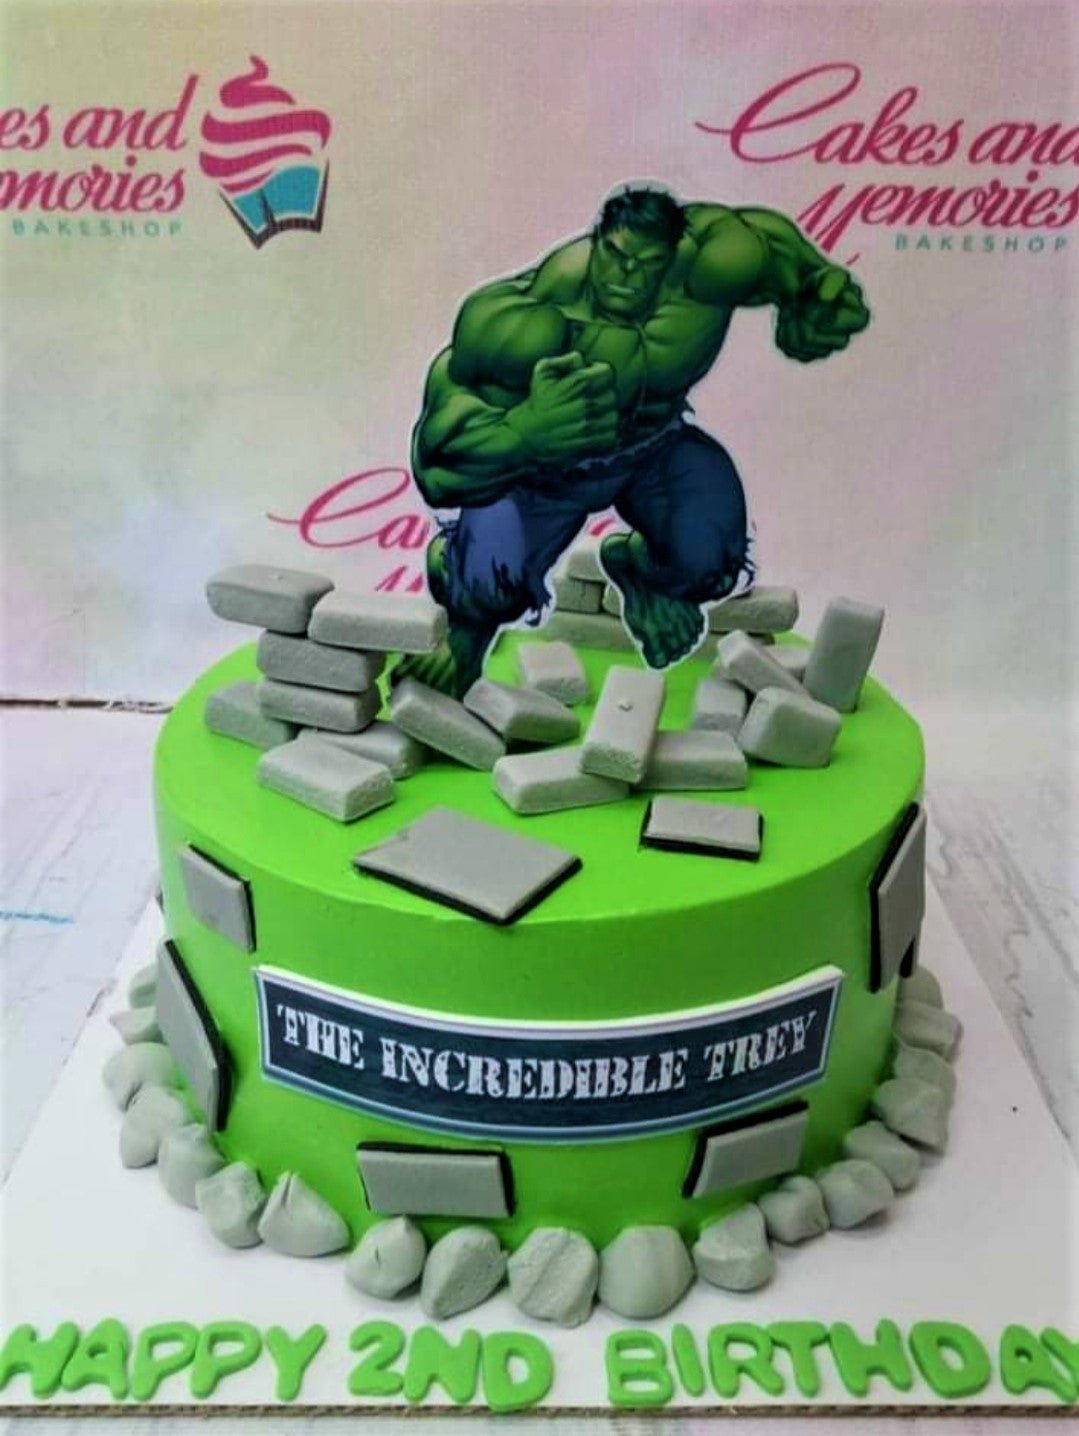 Free From' Marvel Avengers Cake Delivery in Sussex | Harry Batten